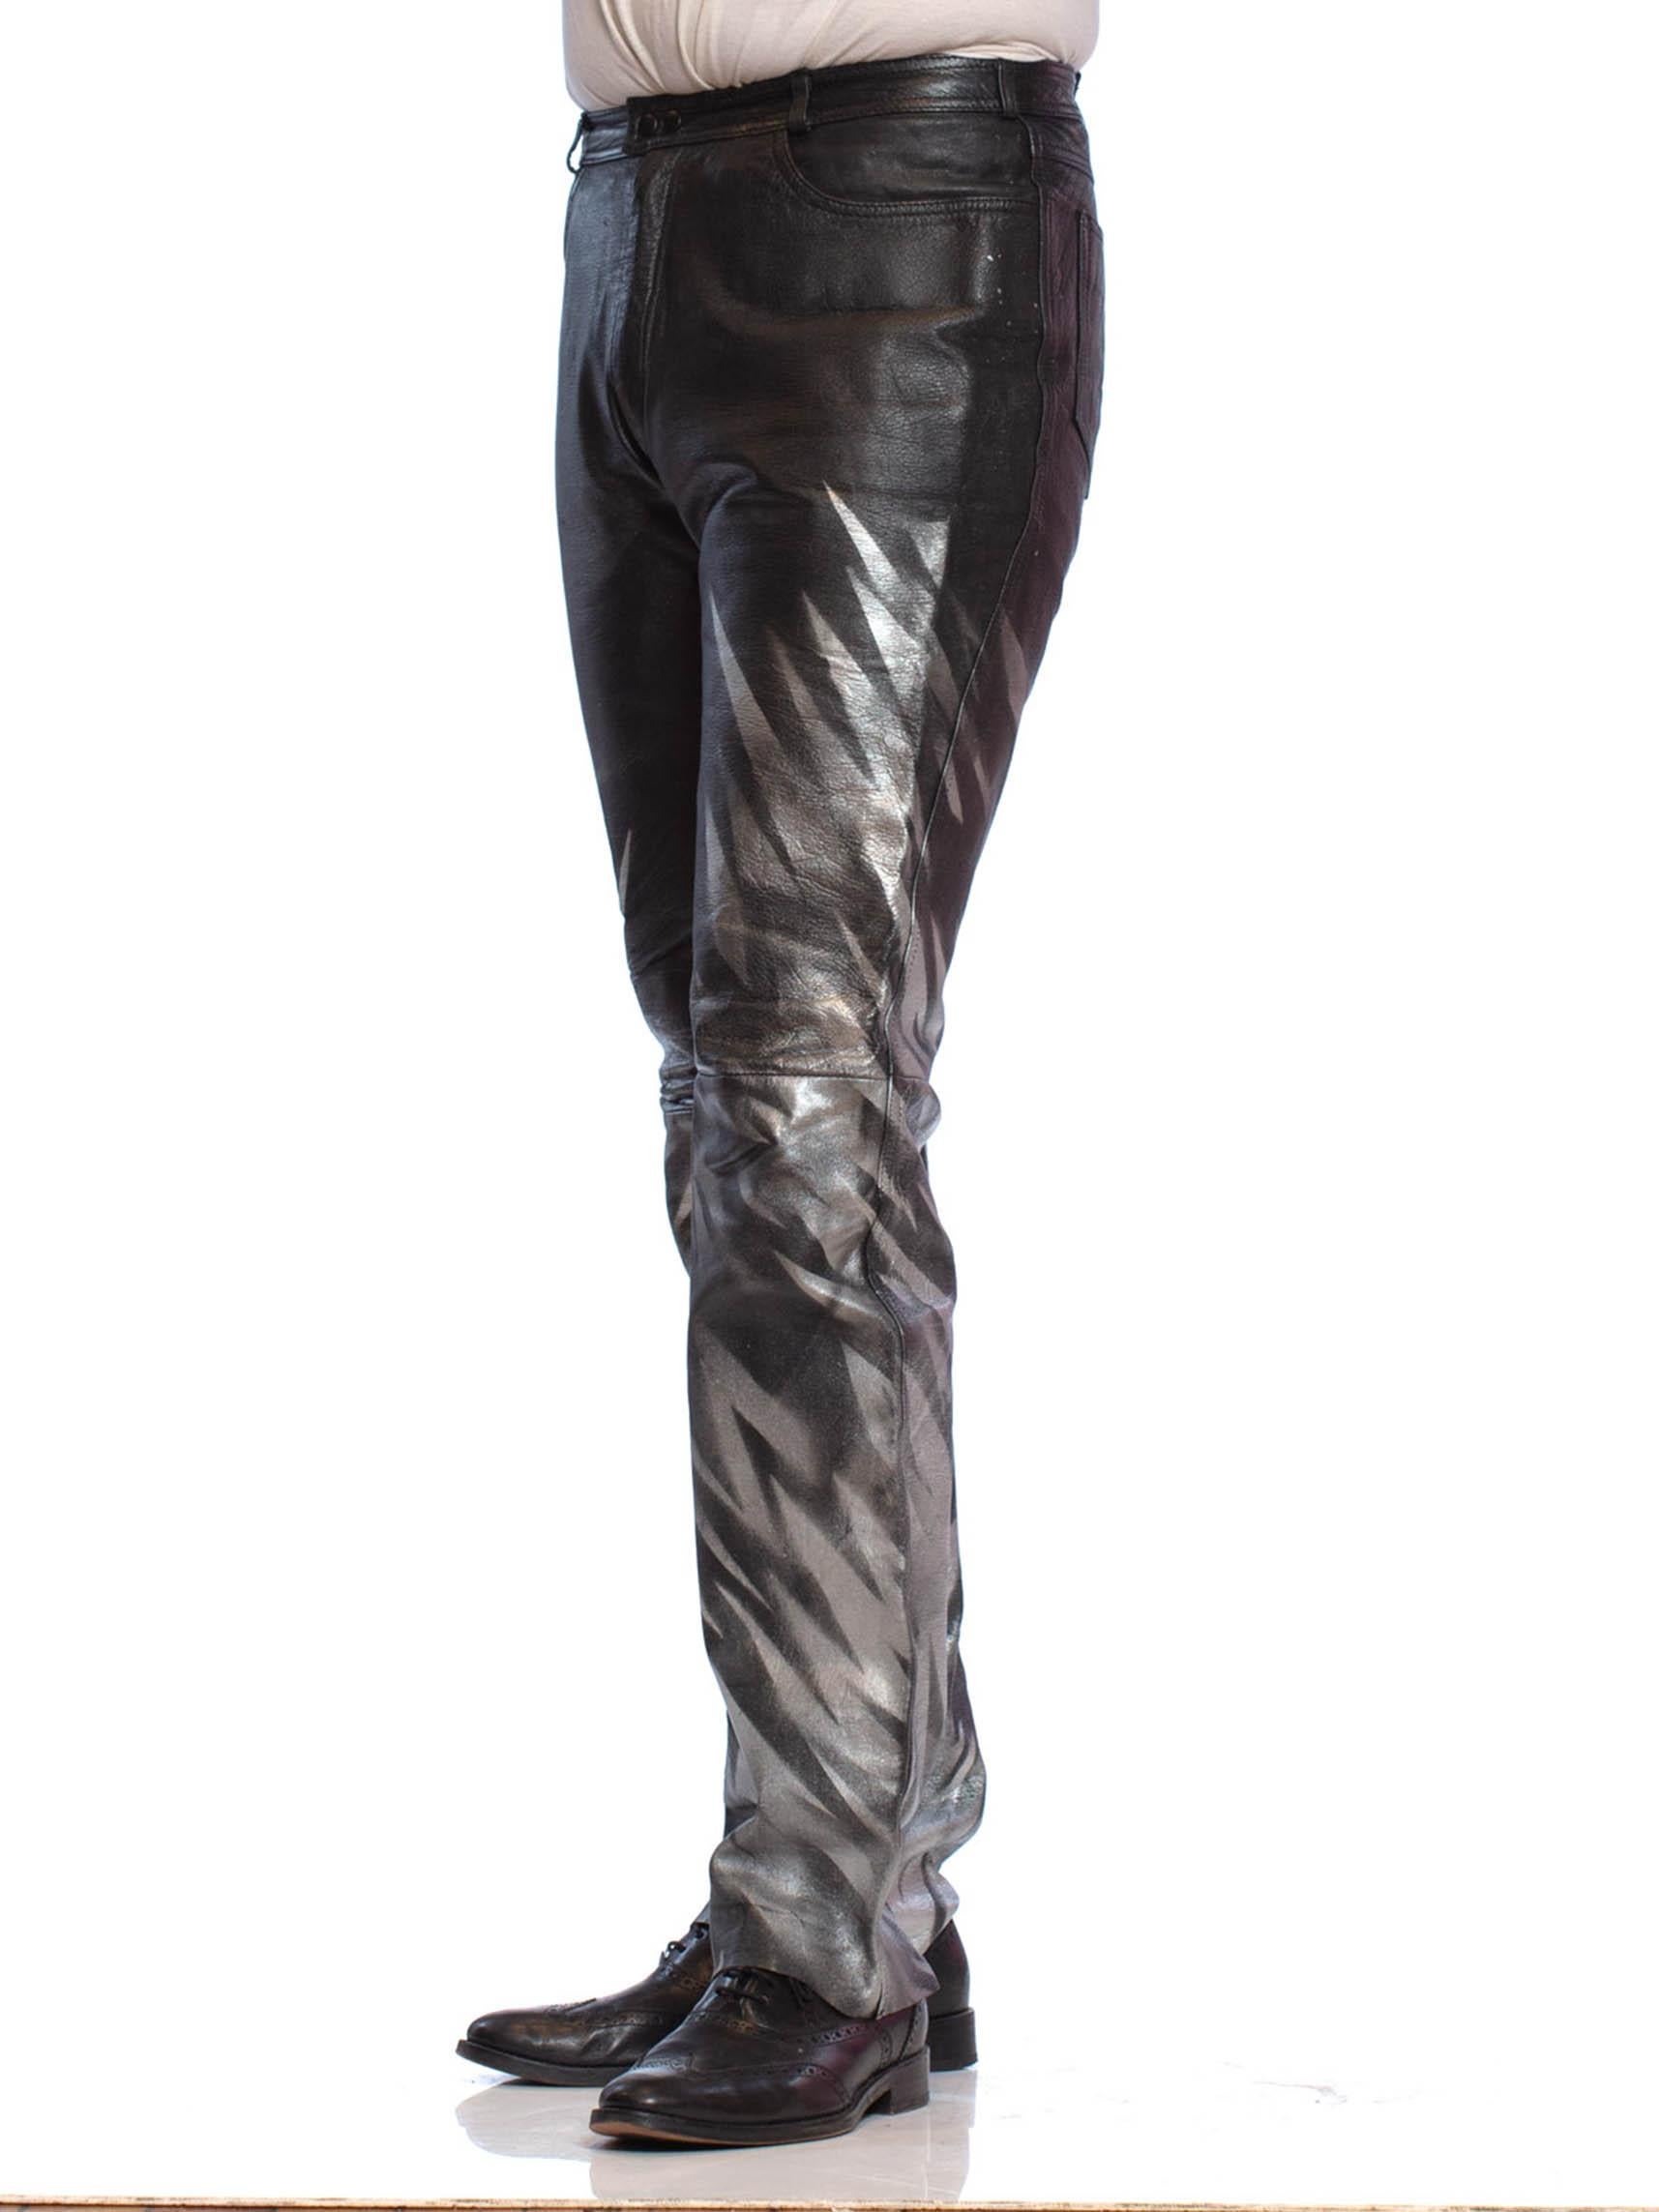 1980S Black Leather Men's Pants With Silver Metallic Graffiti For Sale 2